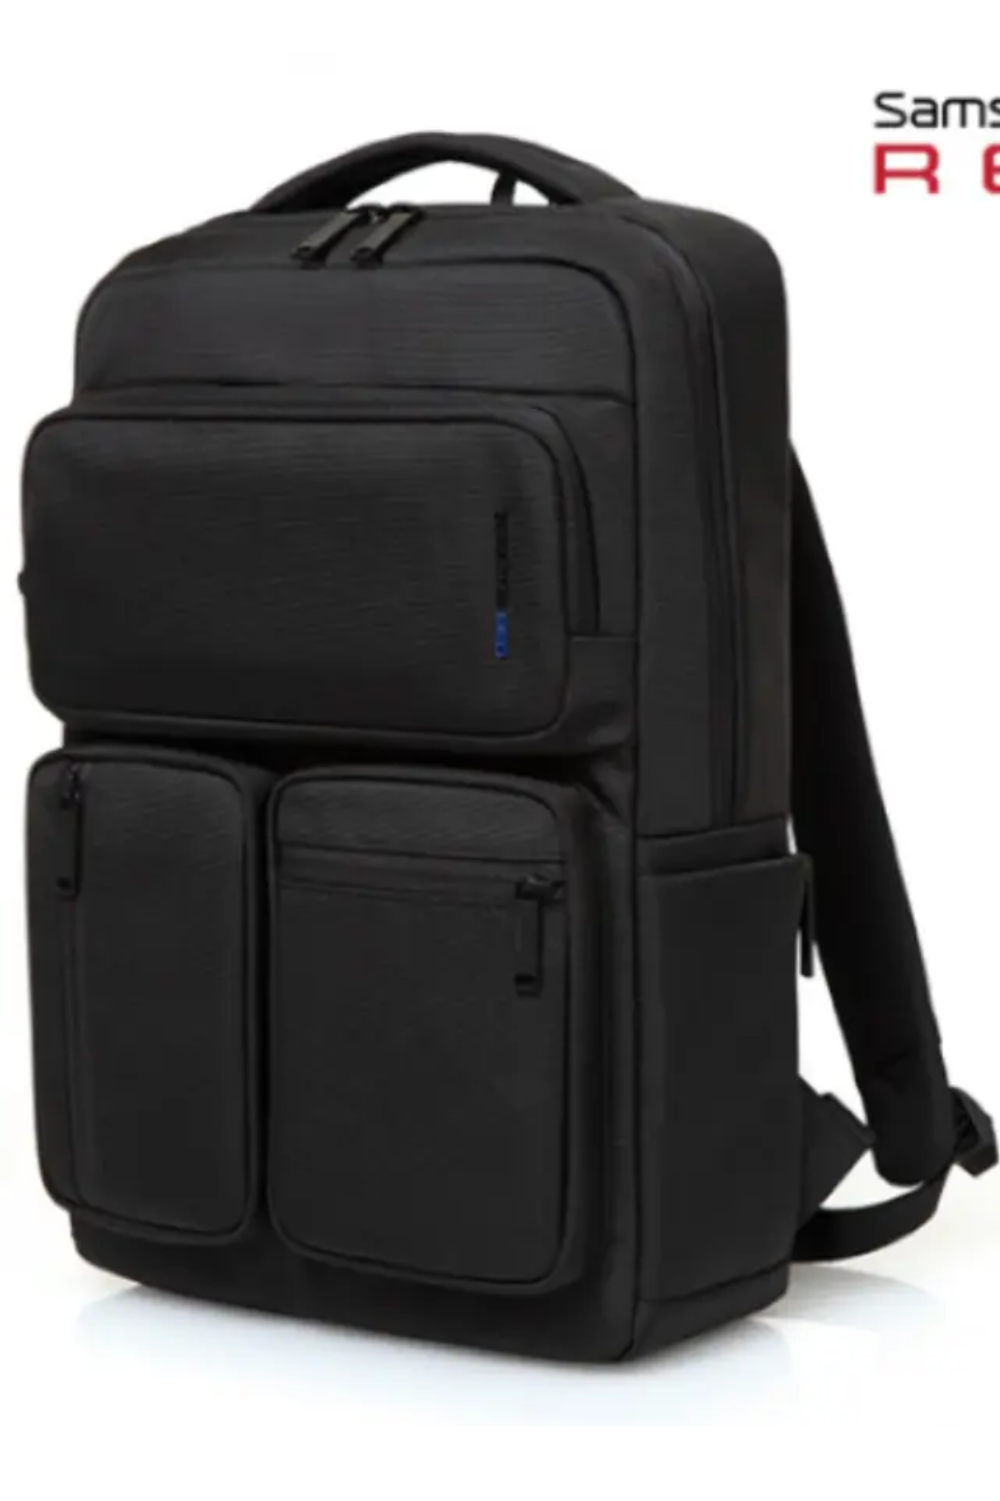 Samsonite Bags: Durable and Stylish Luggage Solutions